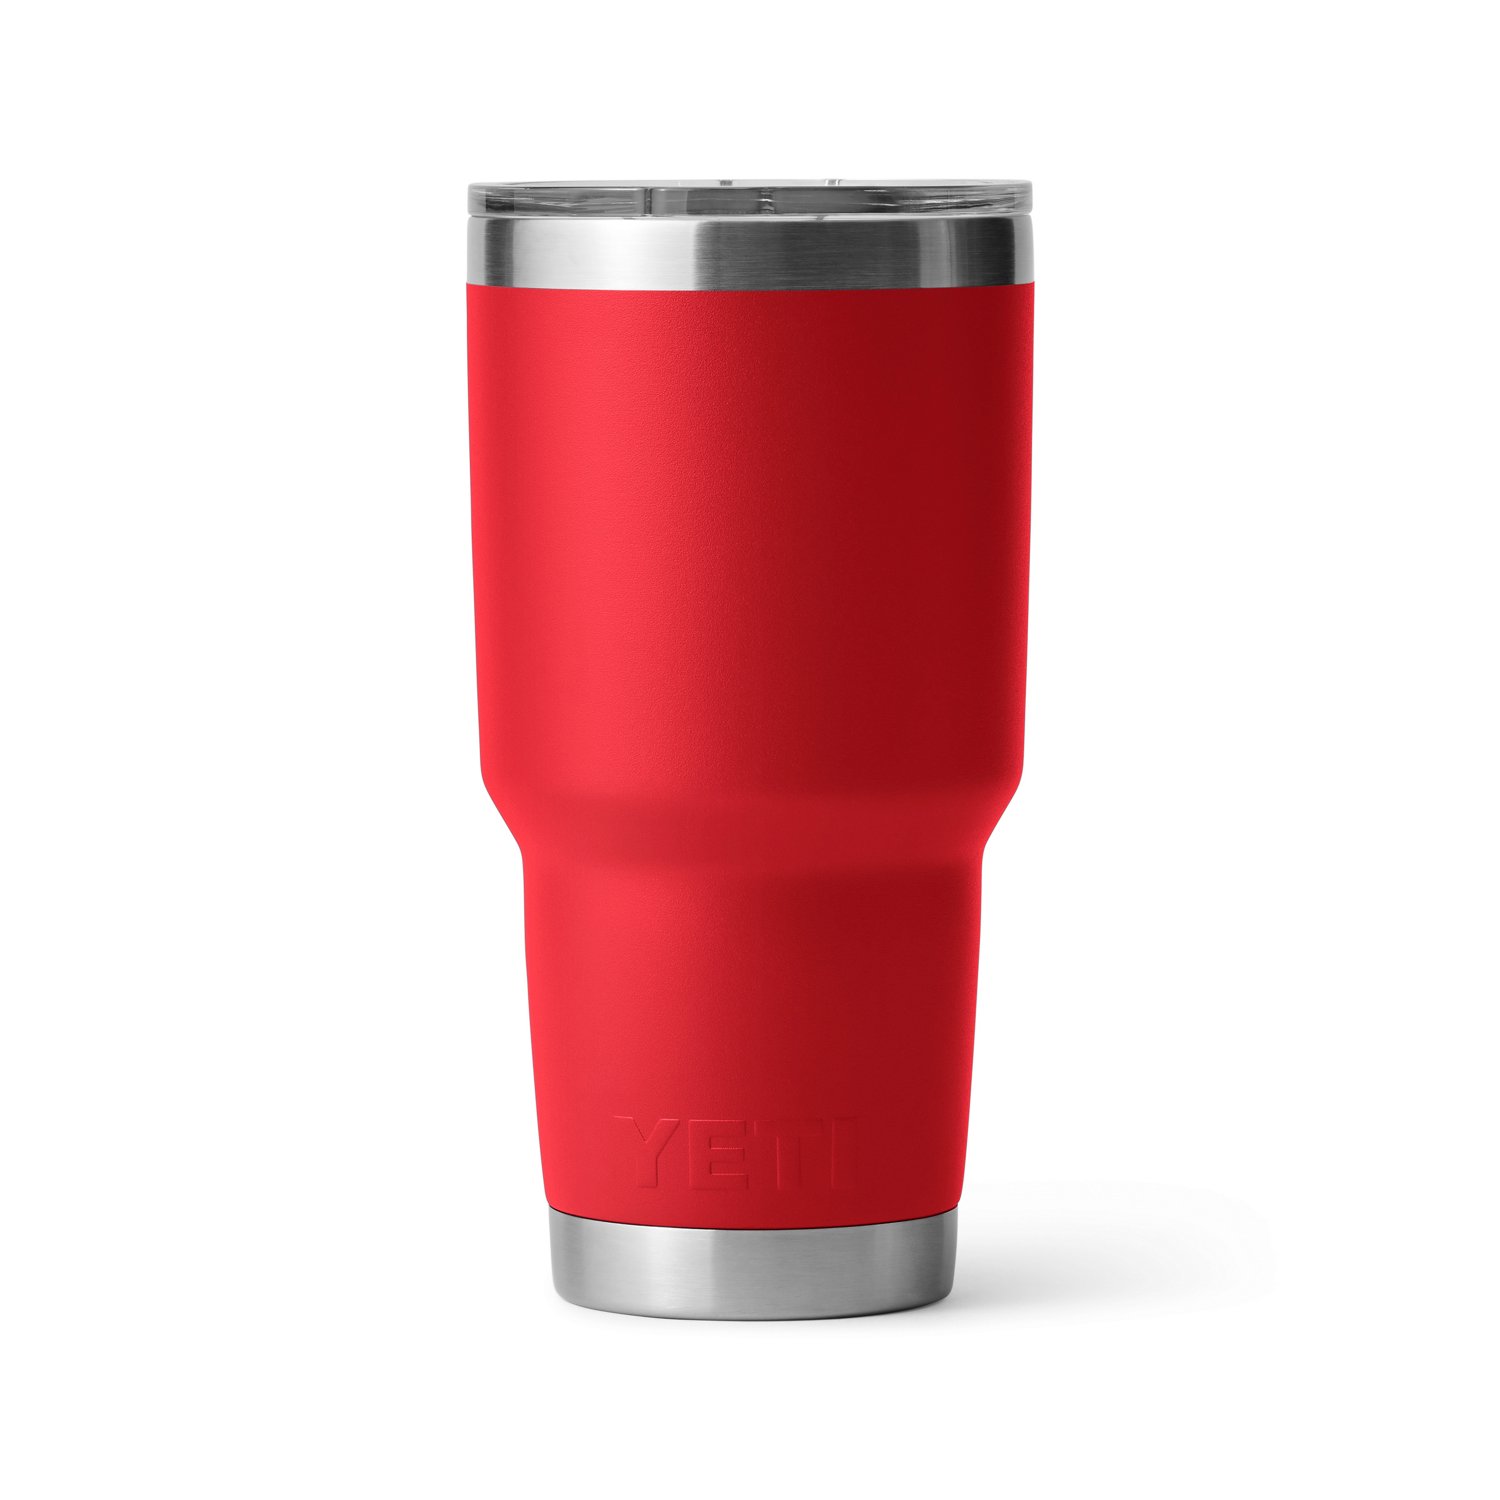 https://academy.scene7.com/is/image/academy//drinkware/yeti-duracoat-rambler-30-oz-tumbler-21071501391-red/10c0e0d7eb5c44bc9a0e346151969a31?$pdp-mobile-gallery-ng$